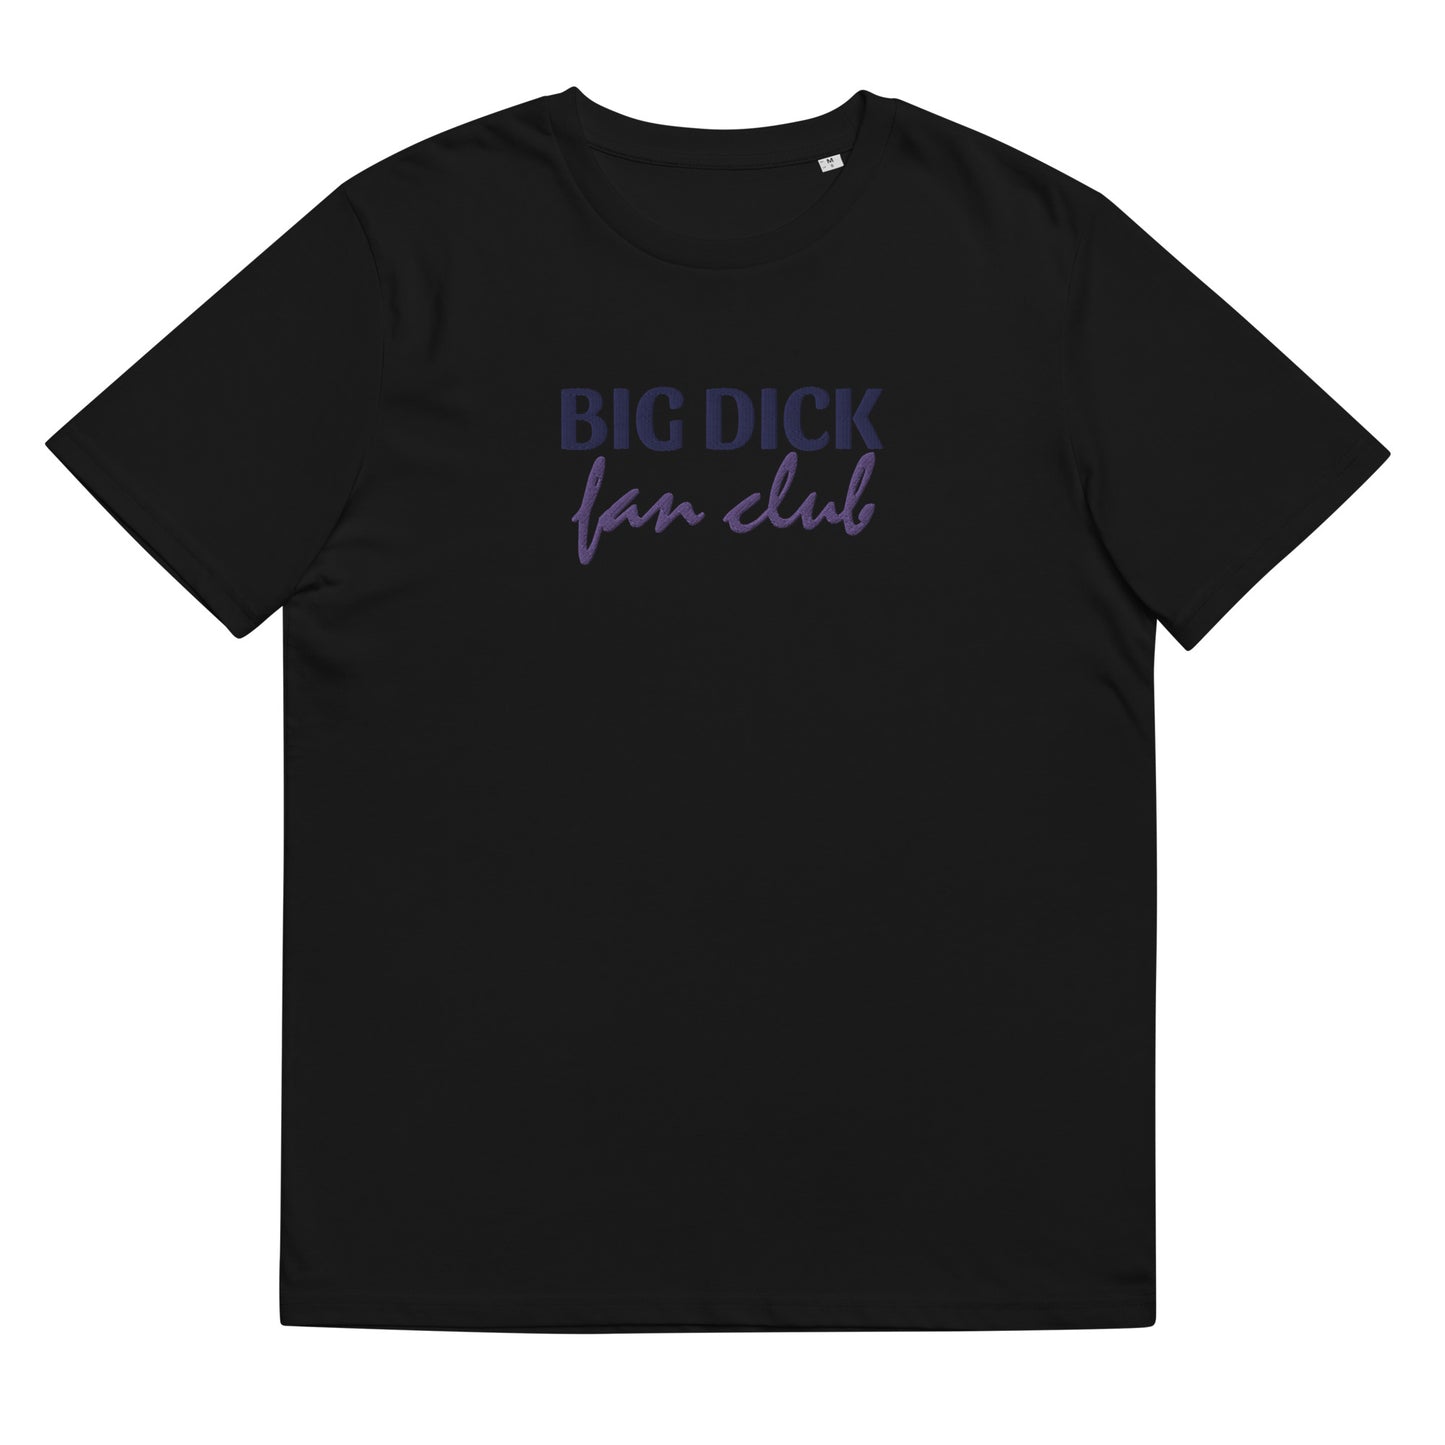 Fitted black organic cotton t-shirt with an embroidered gay joke: "big d fan club" on the center chest. Available in sizes S to 3XL.